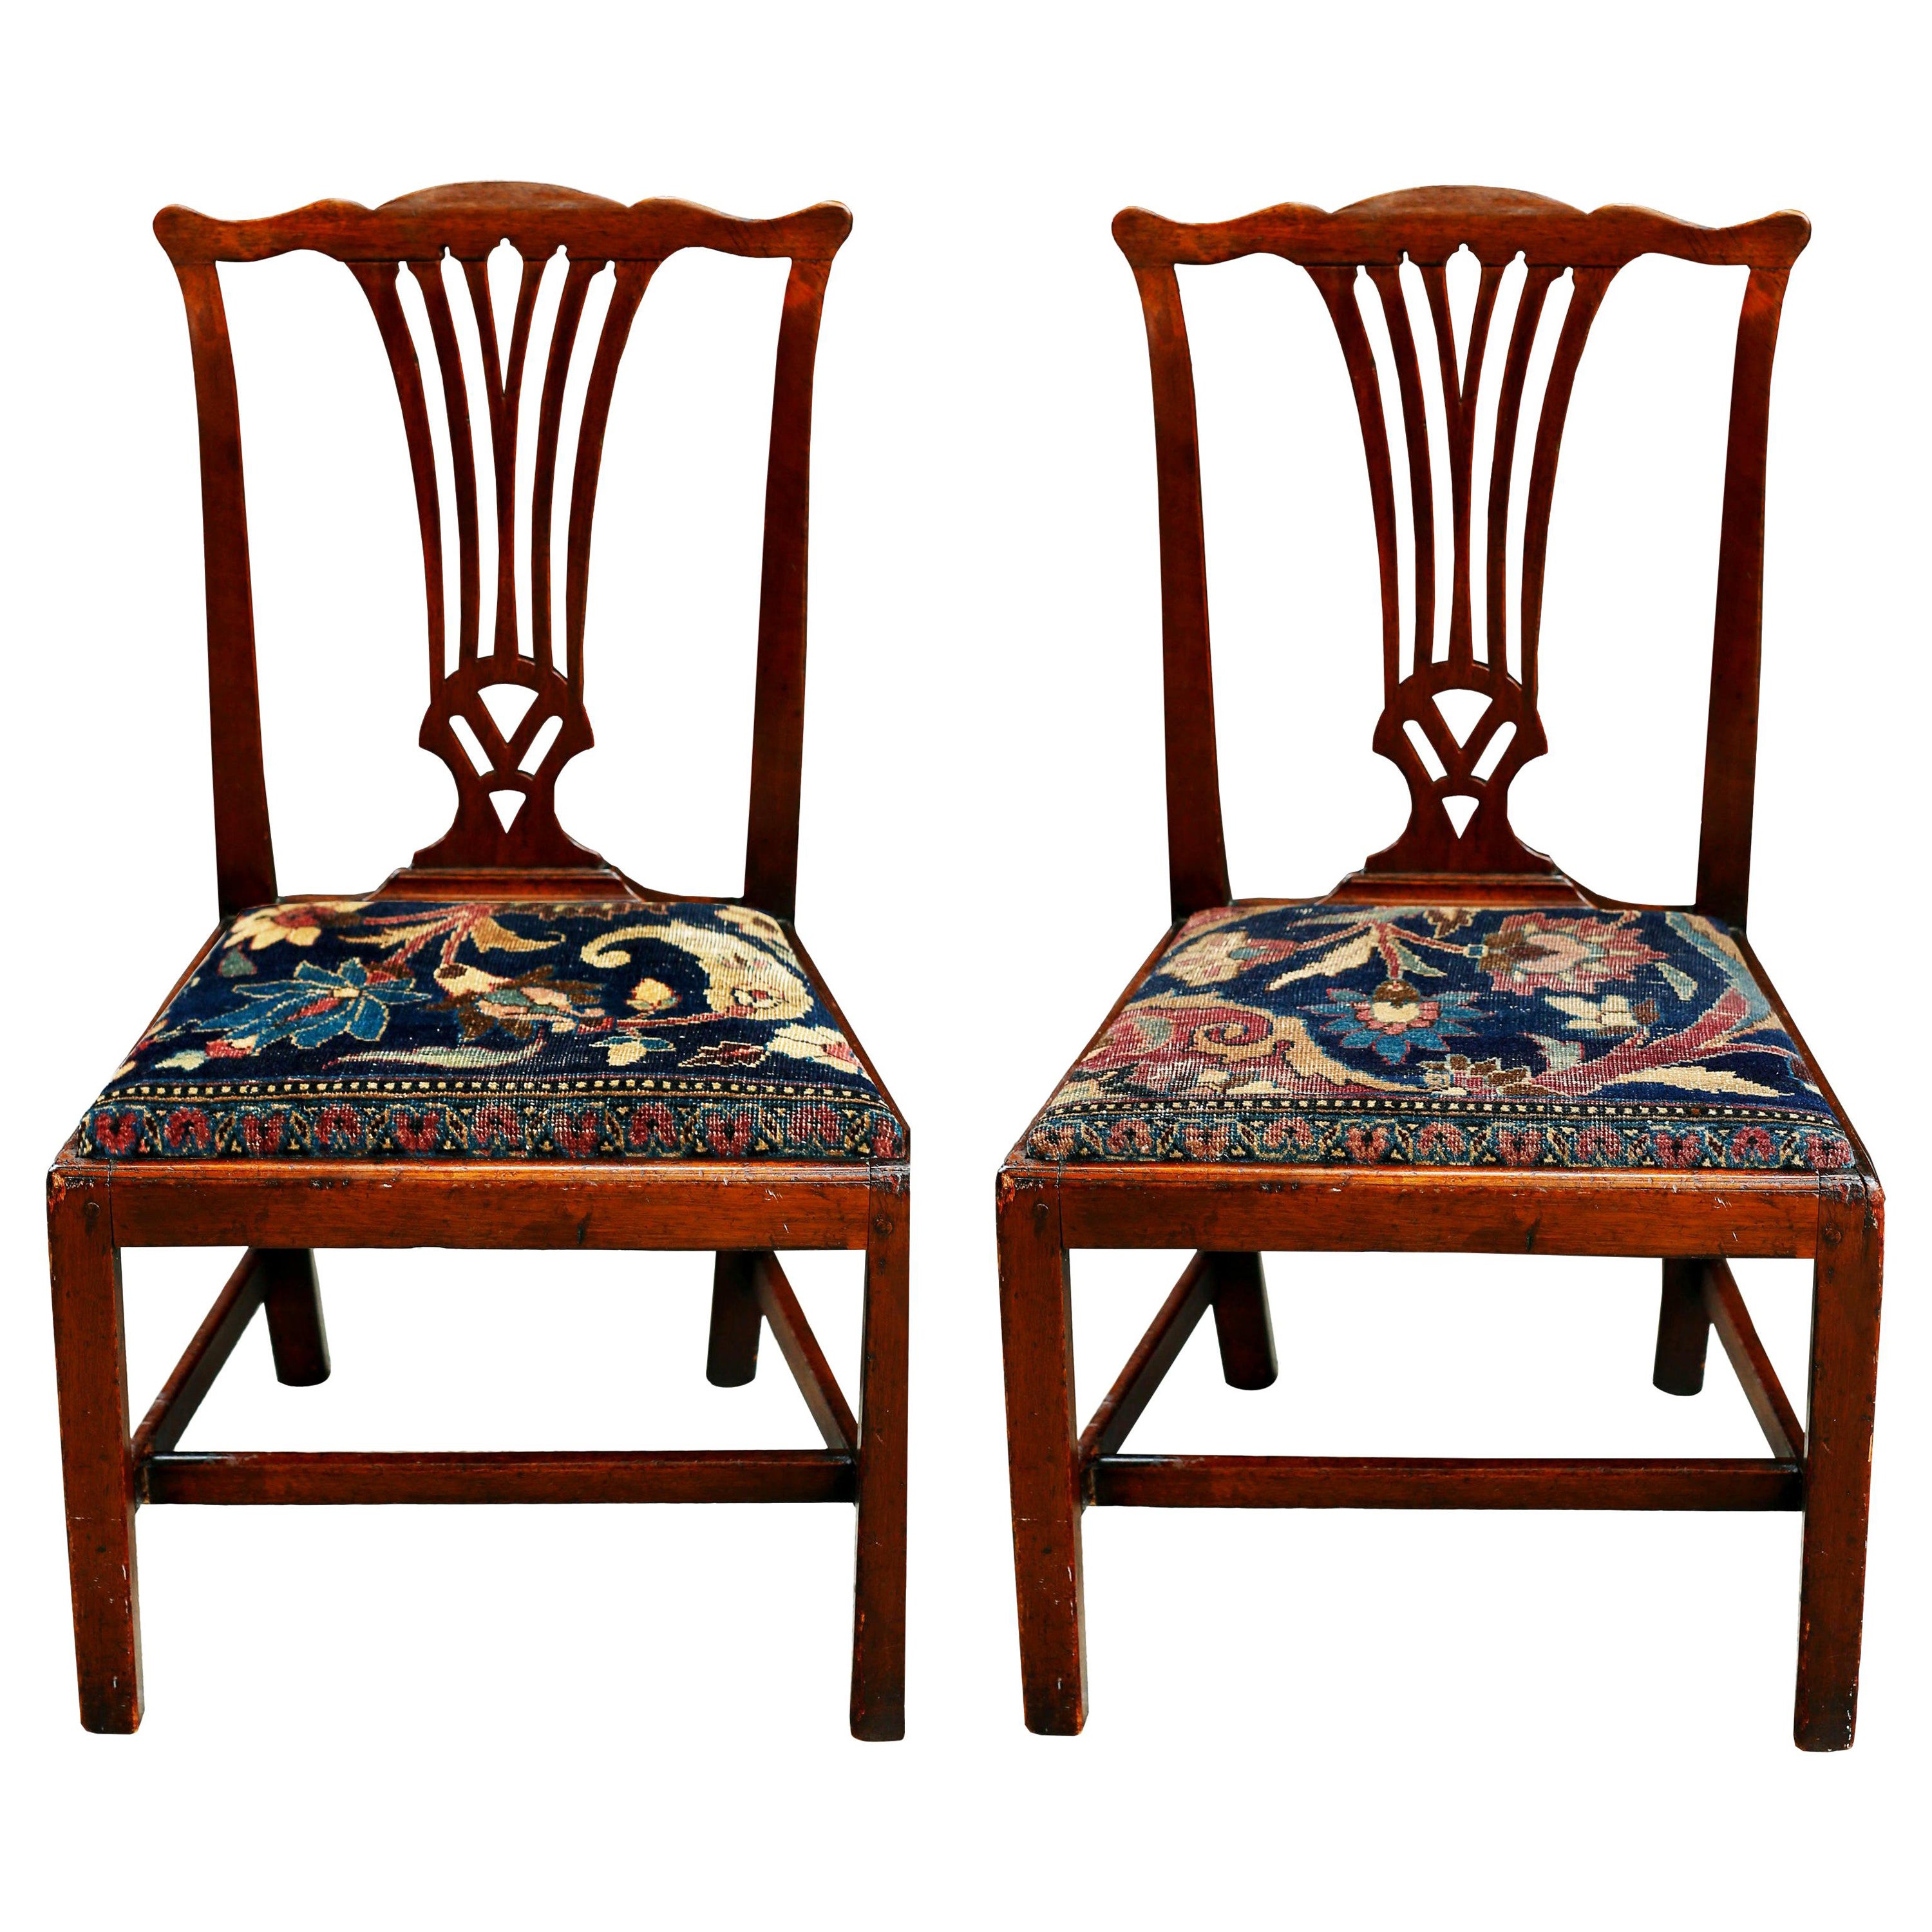 Mid-18th Century American Walnut Chippendale Chairs with Ushak Seats